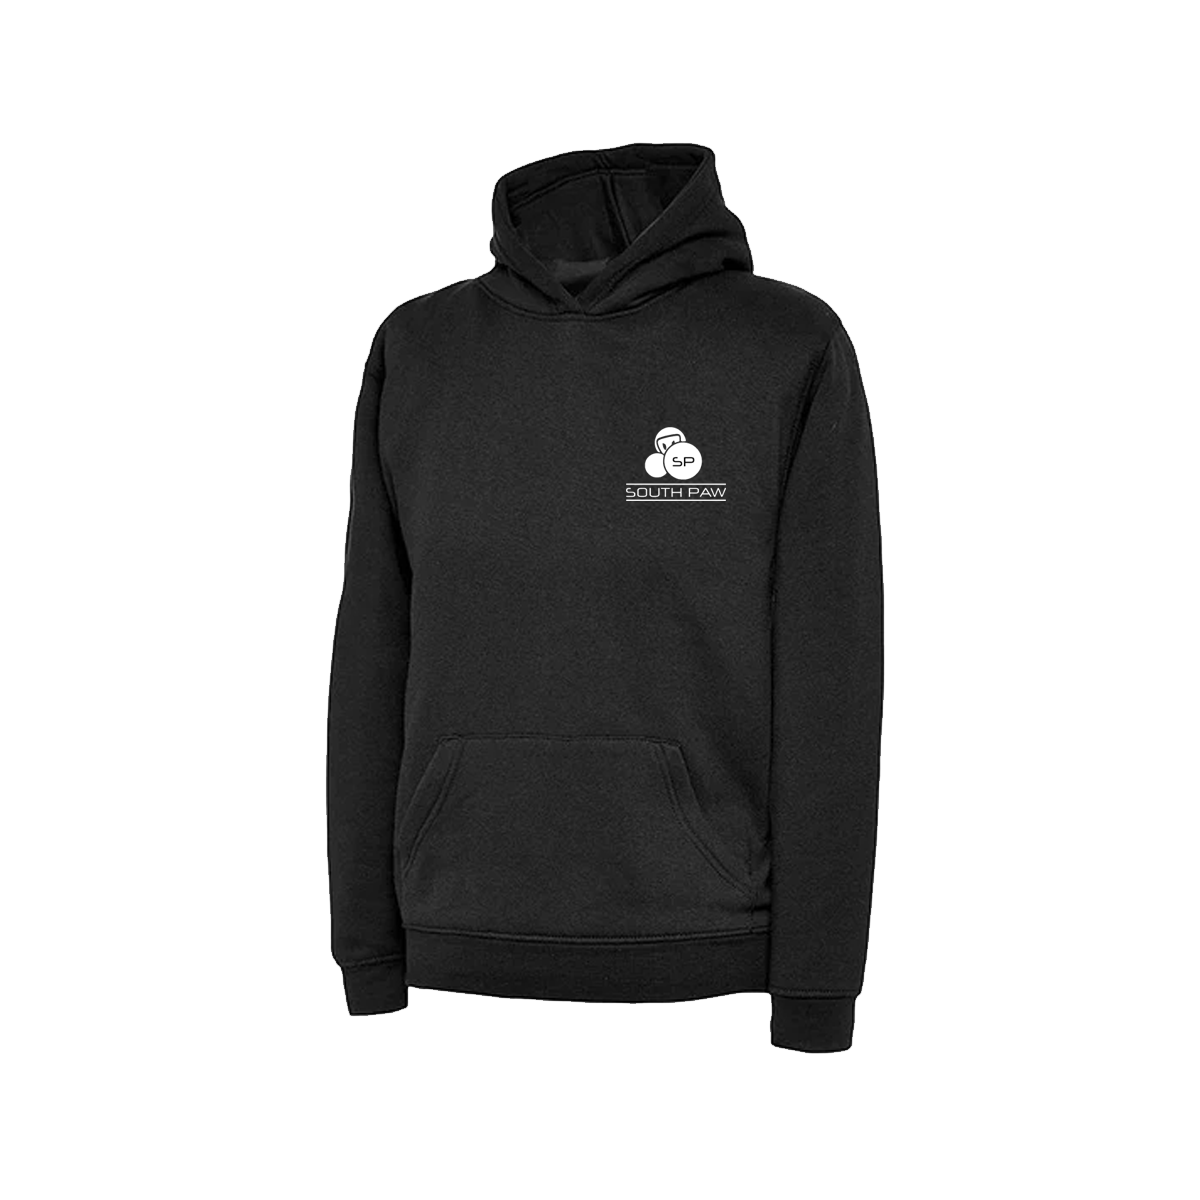 Official Southpaw Black Hoodie (Kids)